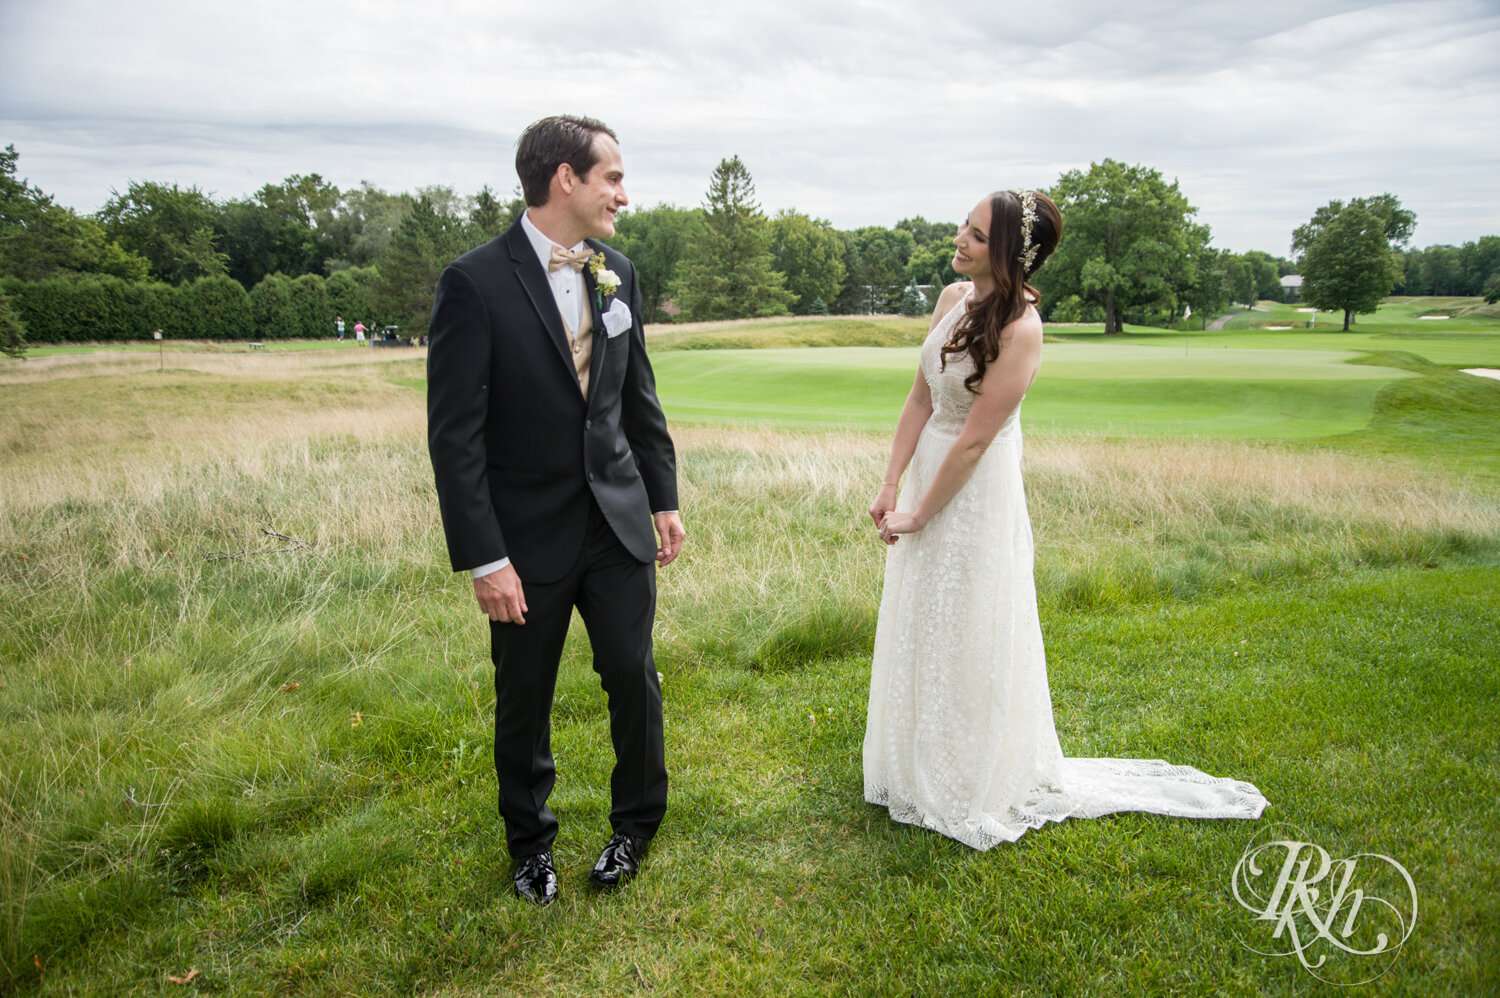 Bride and groom share first look at Olympic Hills Golf Club in Eden Prairie, Minnesota.